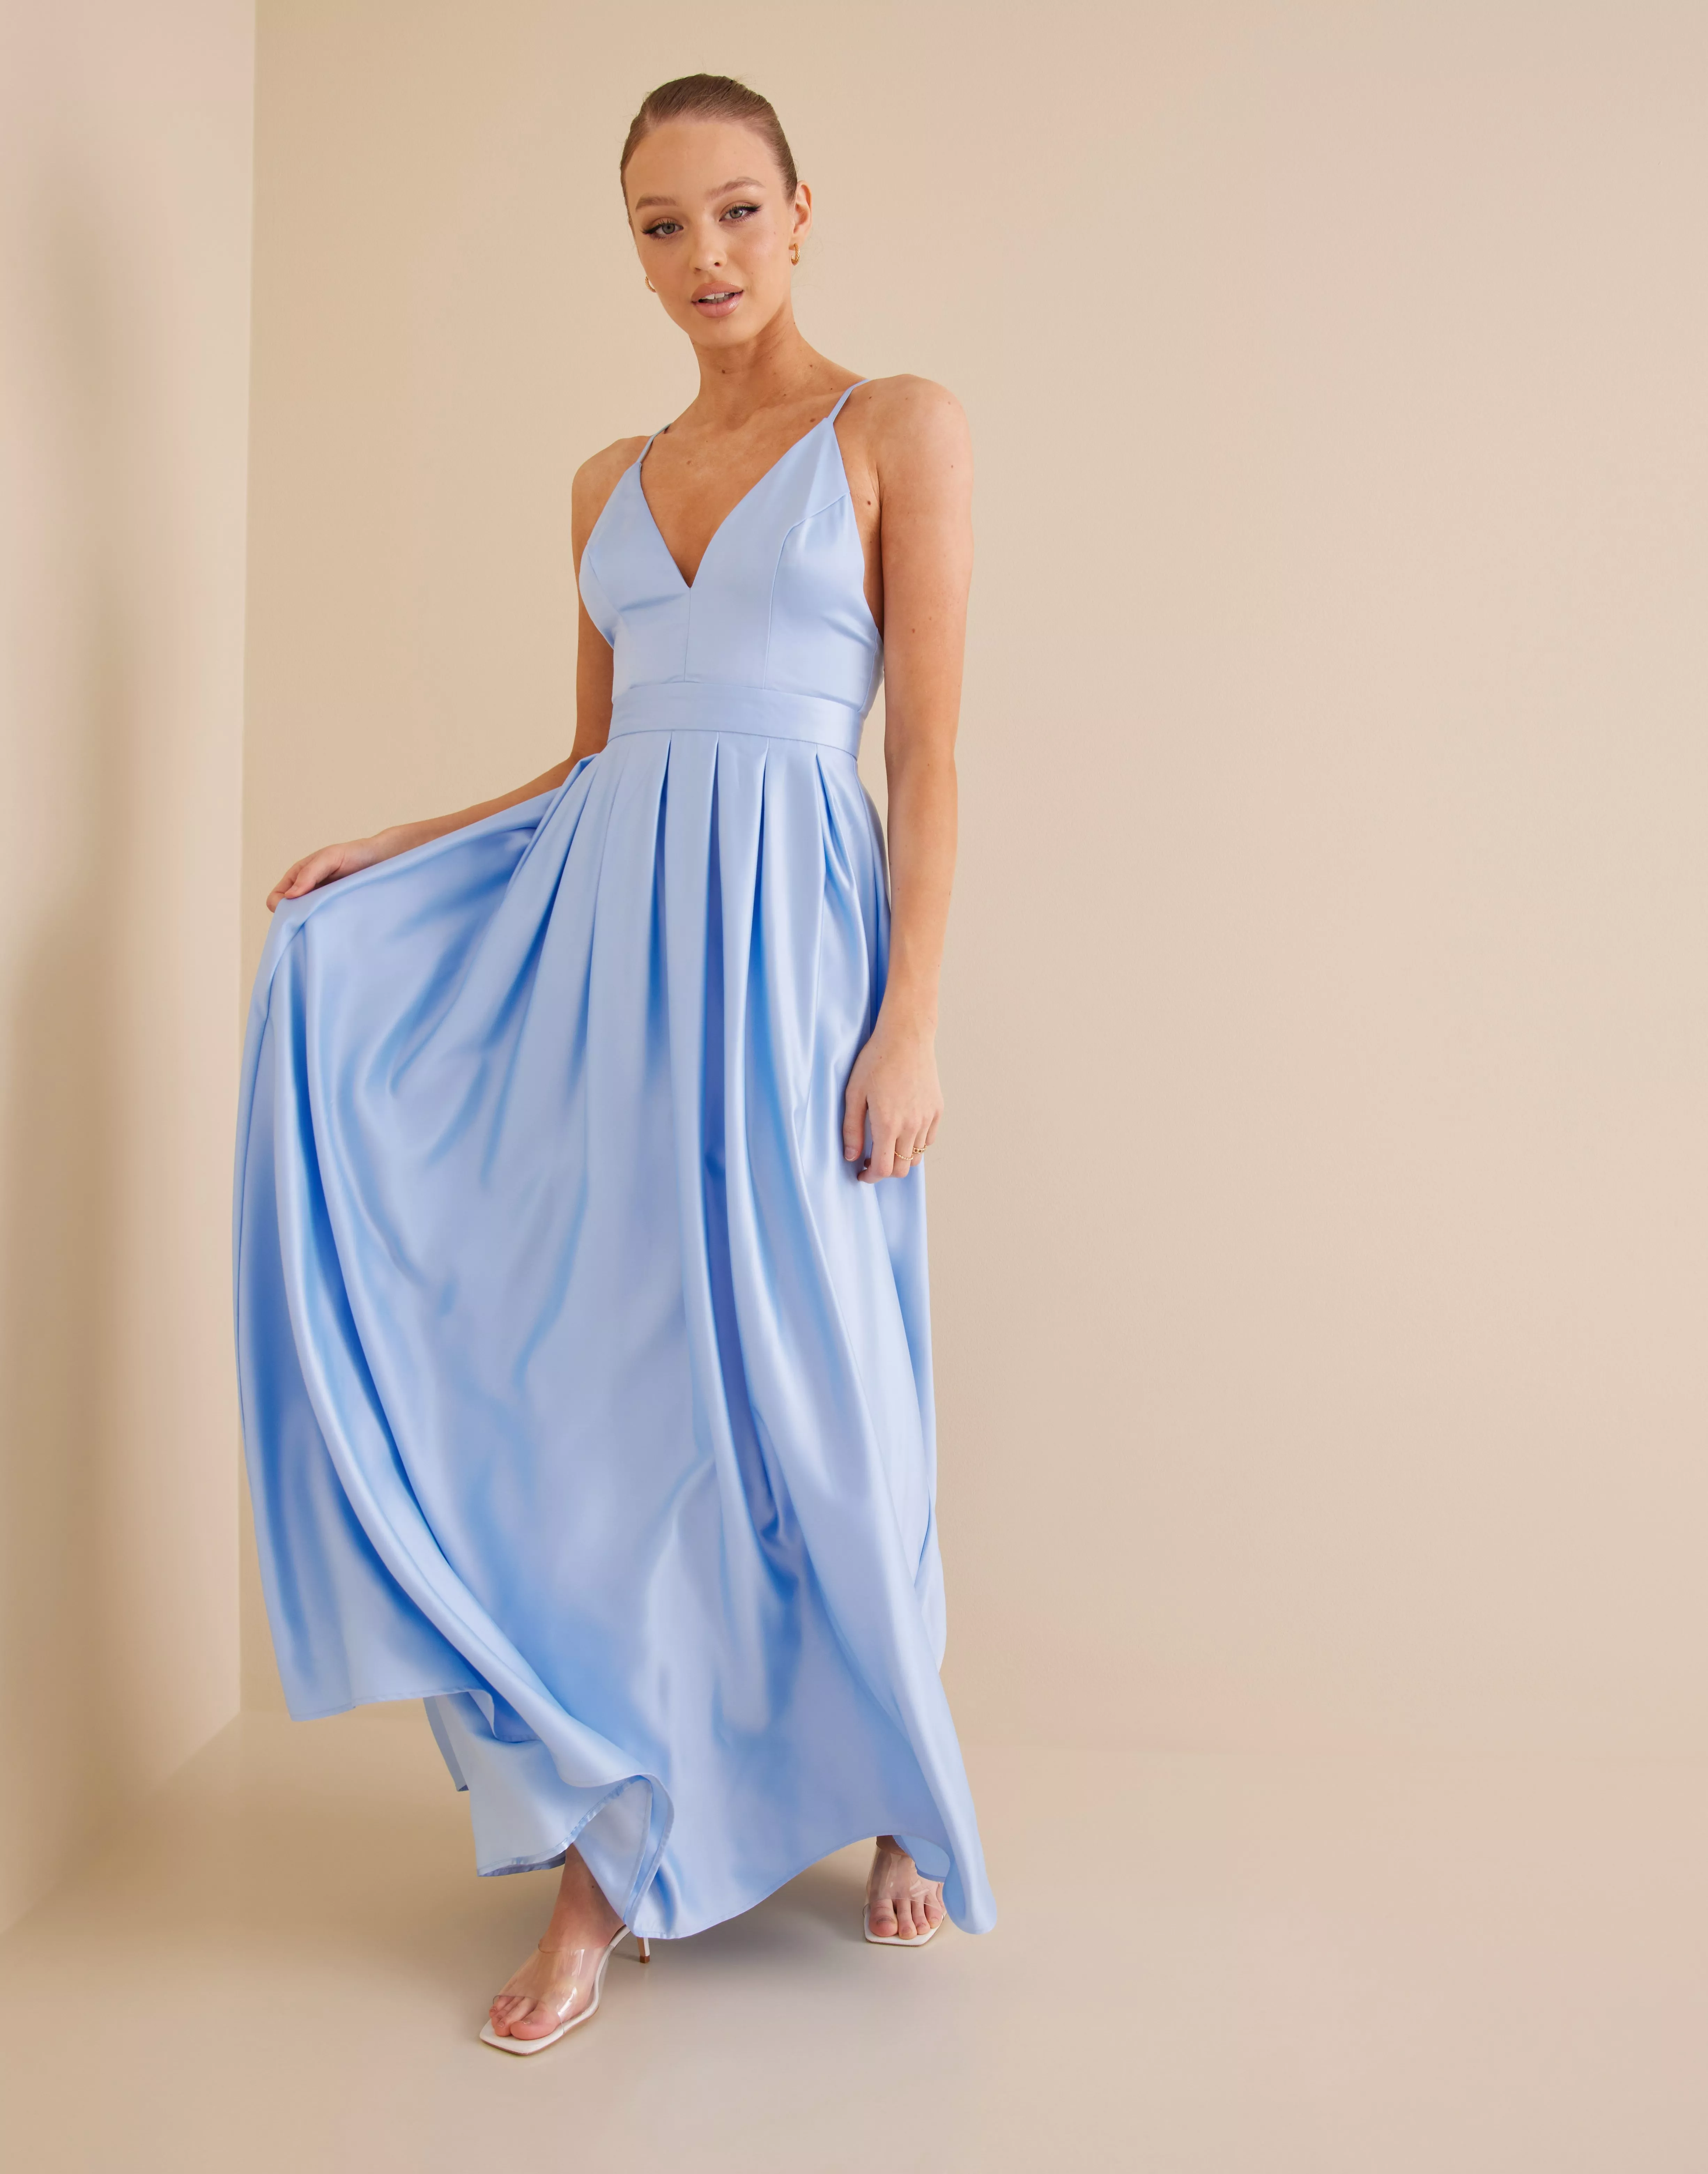 Nelly Fabulous Ball Gown - Lyseblå | Nelly.com